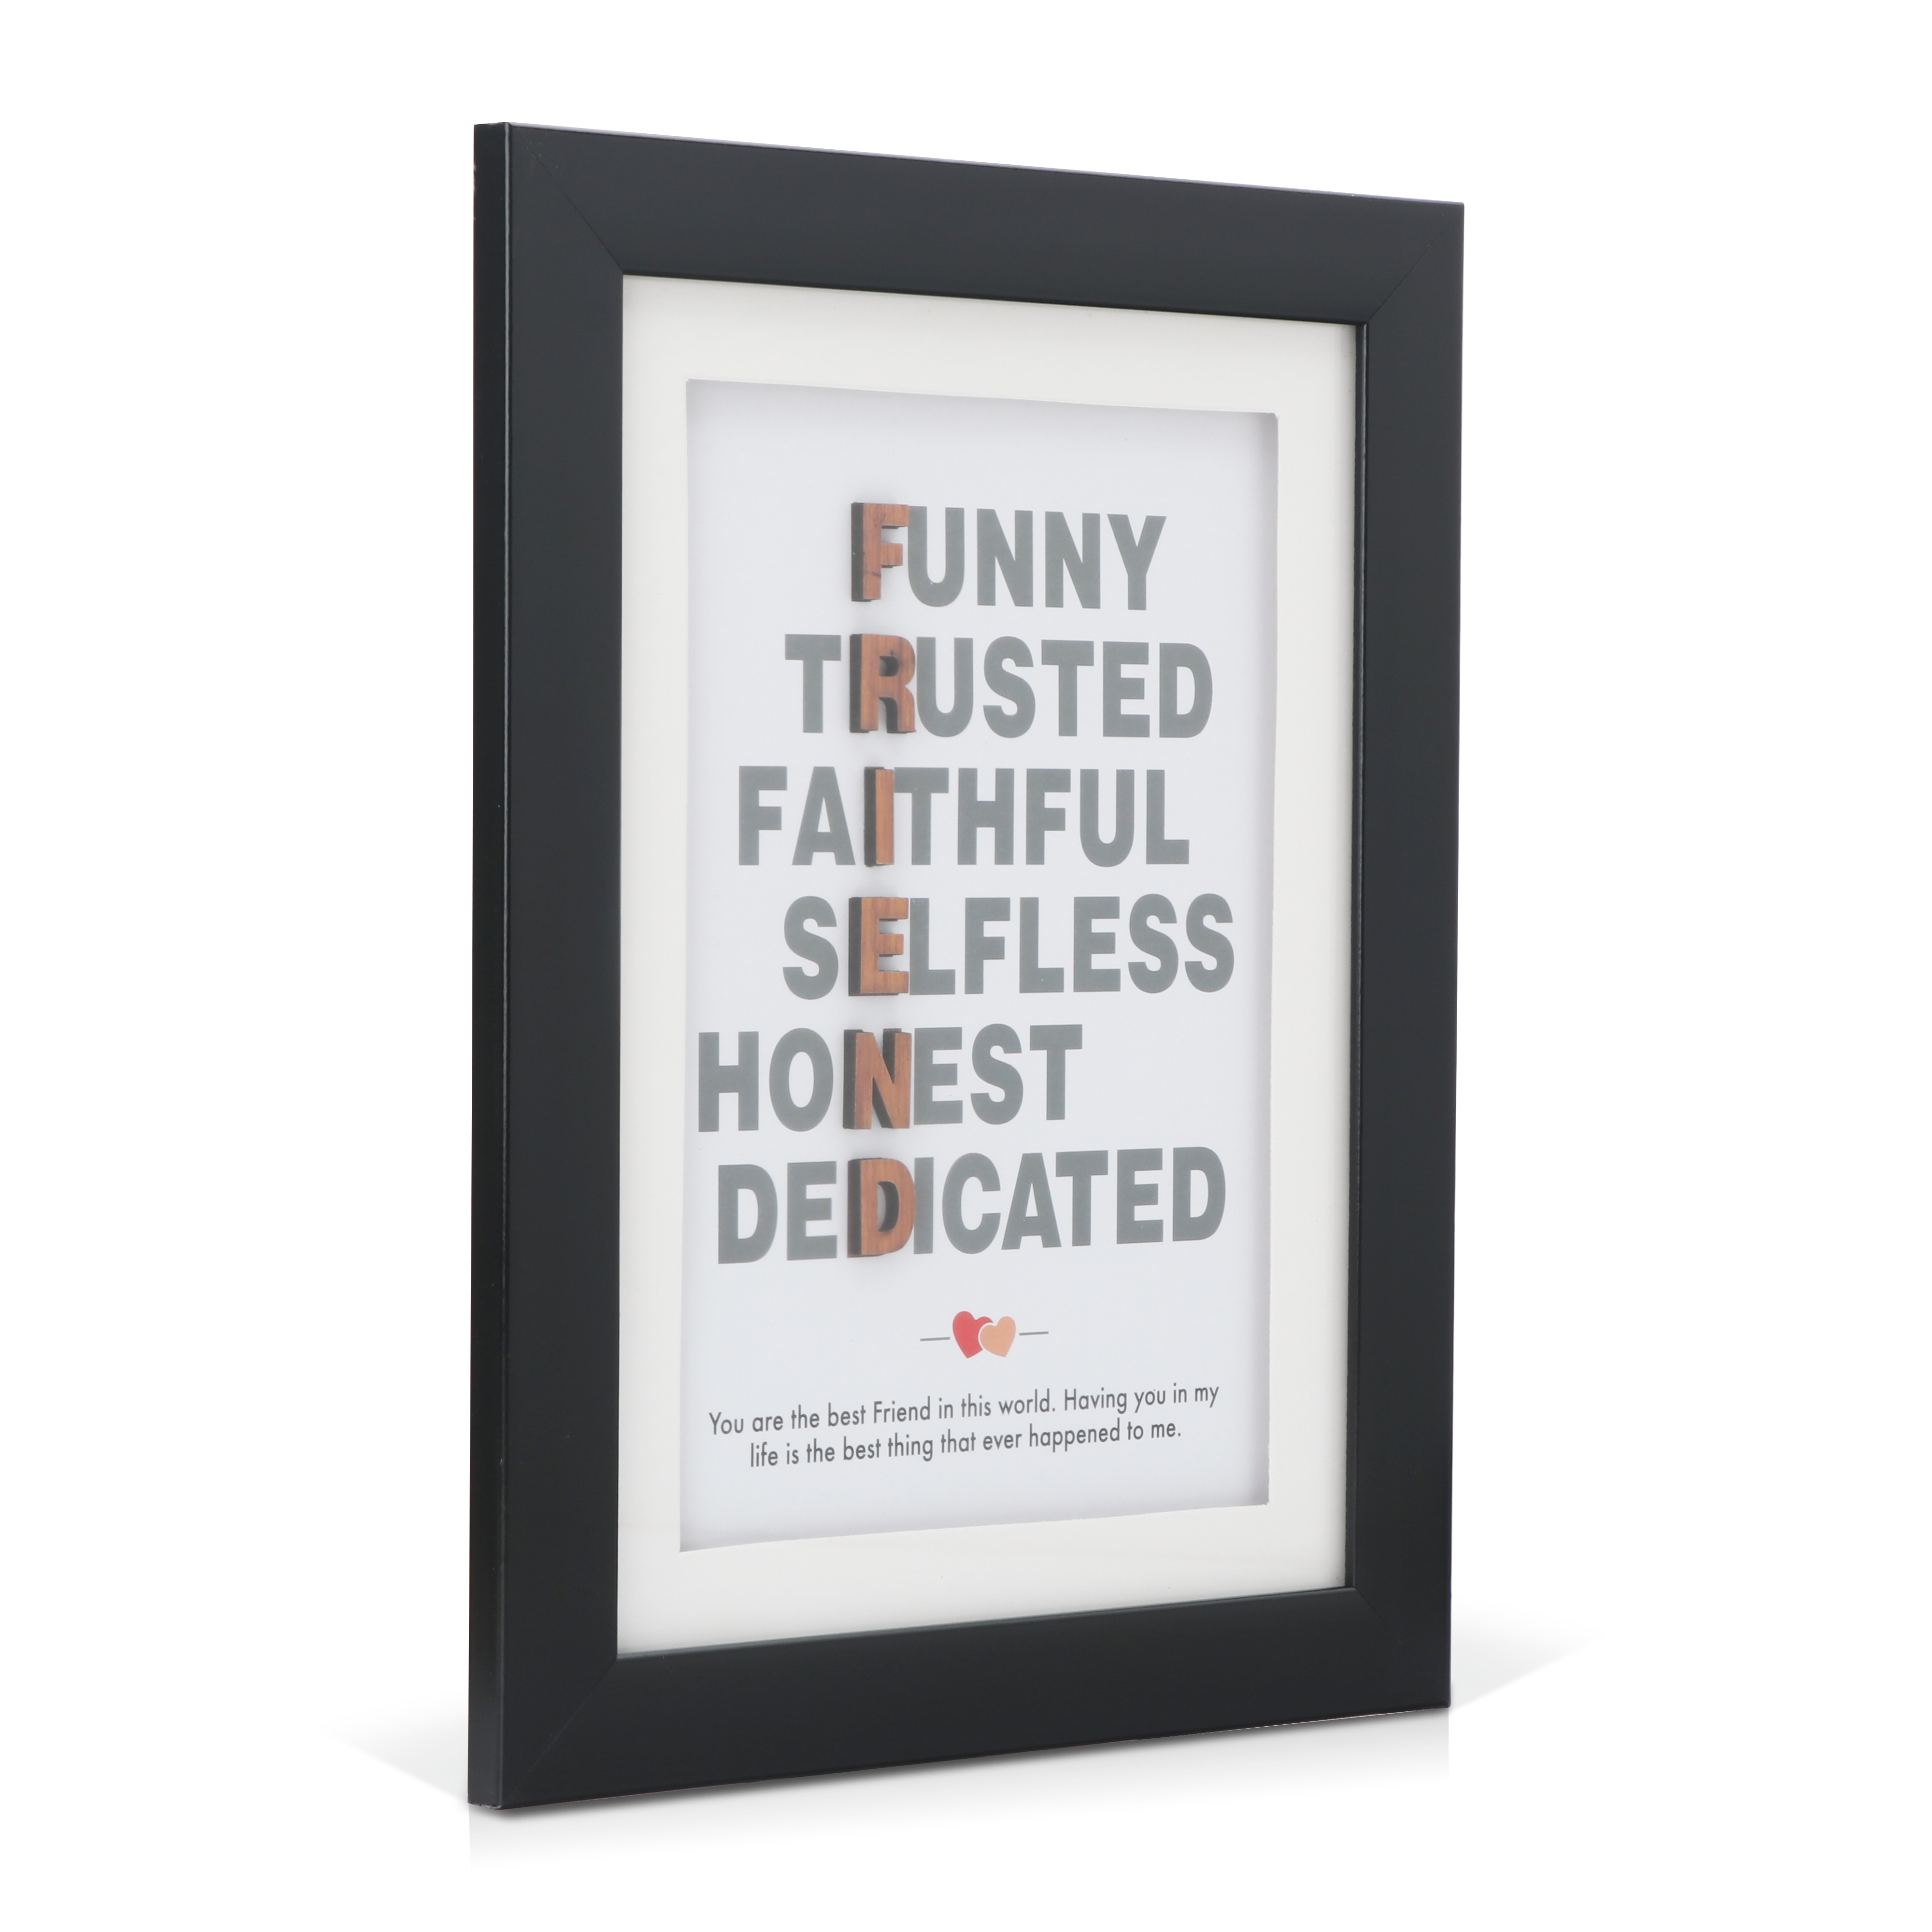 Archies | Archies Quotation Photo Frame with Greeting Card for Friend 1